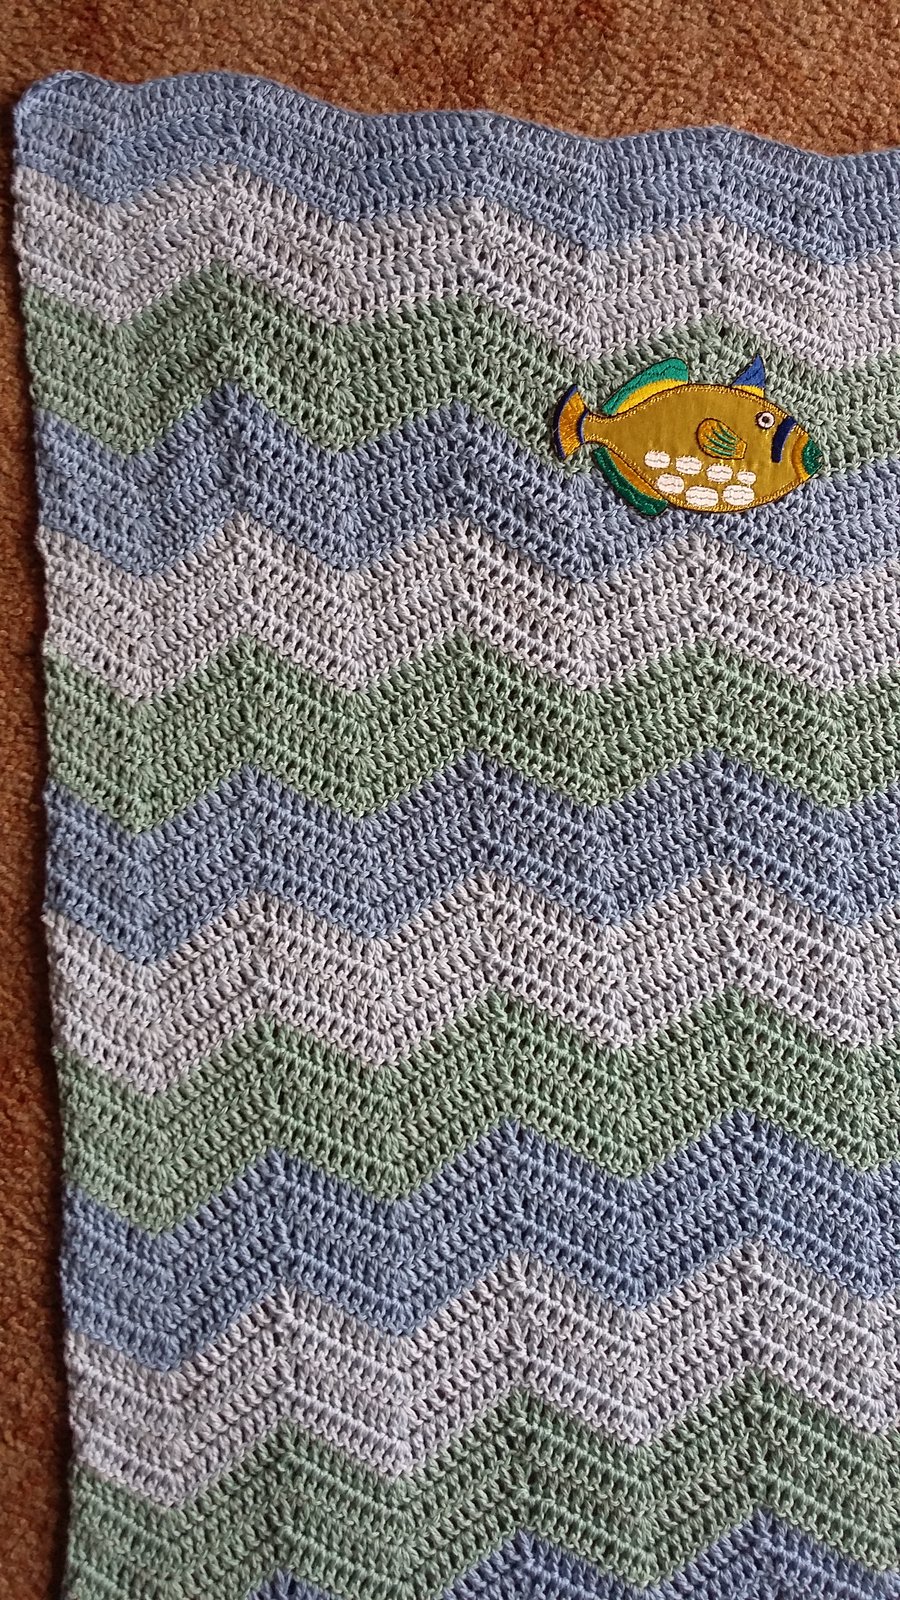 Crochet baby blanket in wavy stripes with applique fish